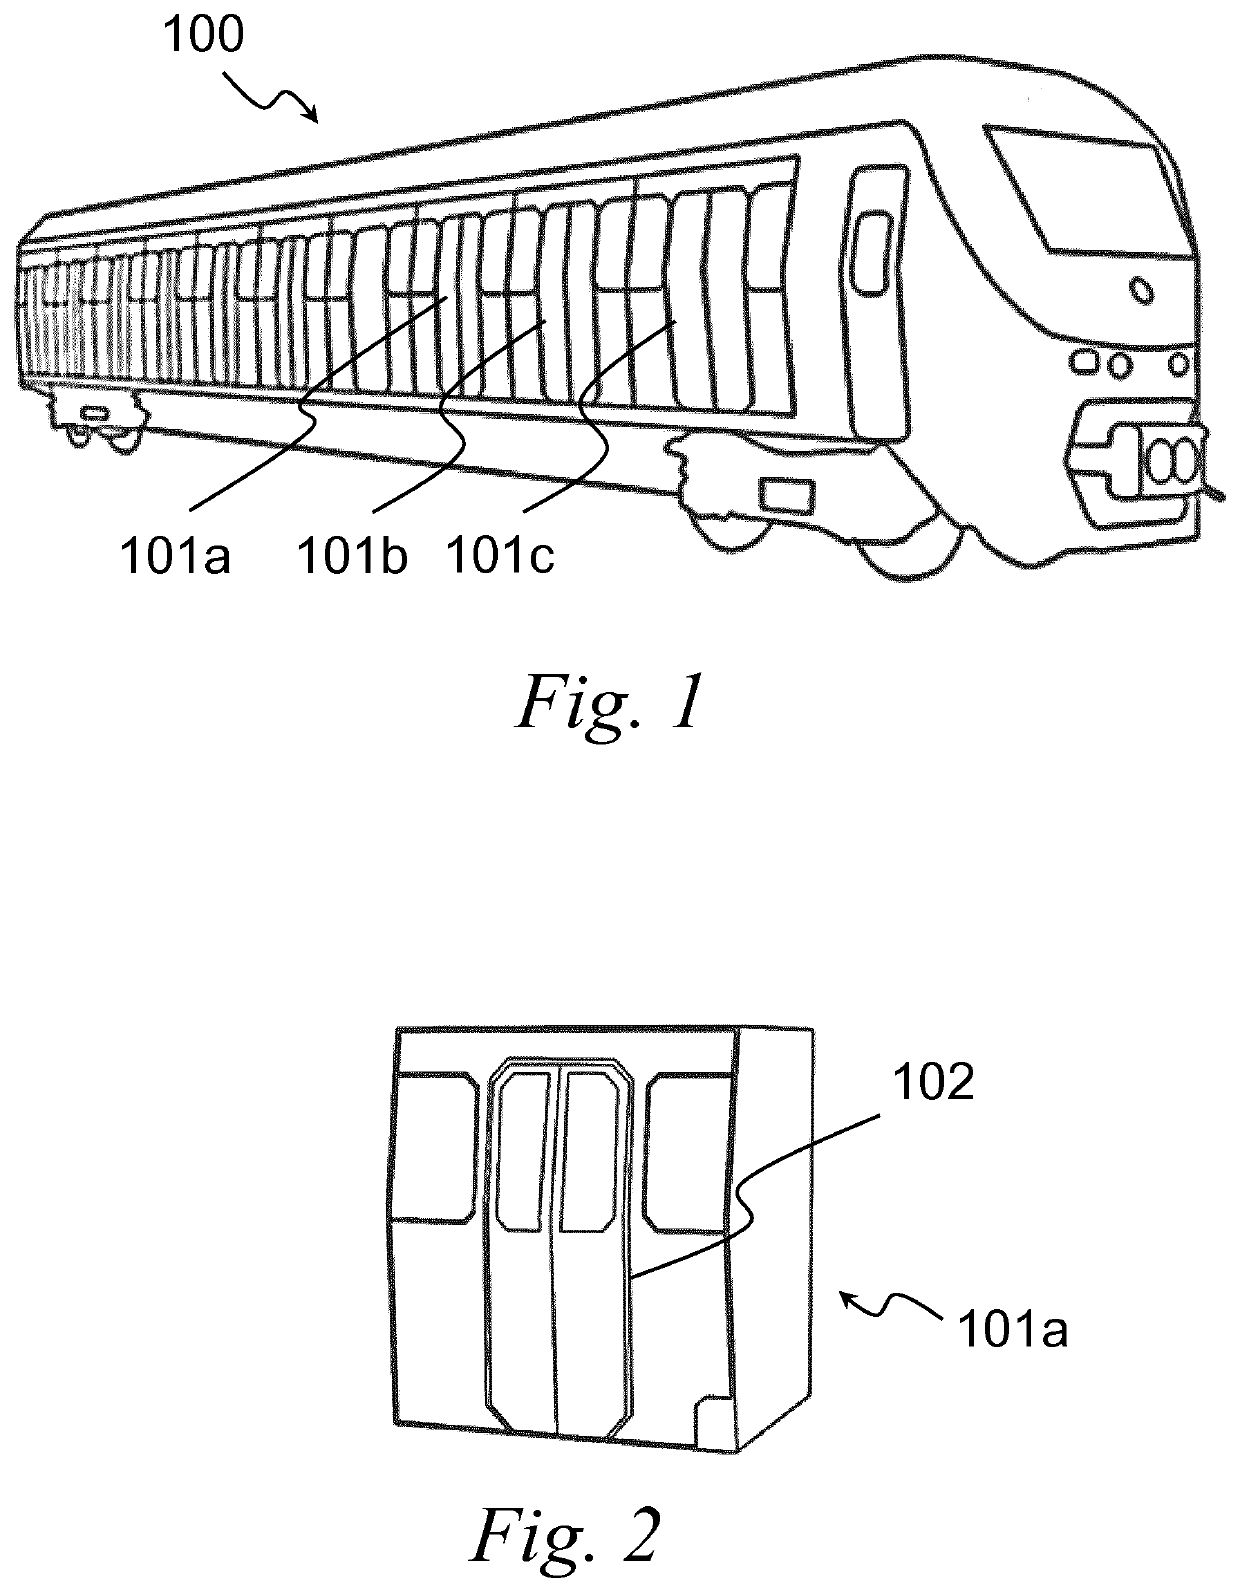 Flexible combined transport of people and freight